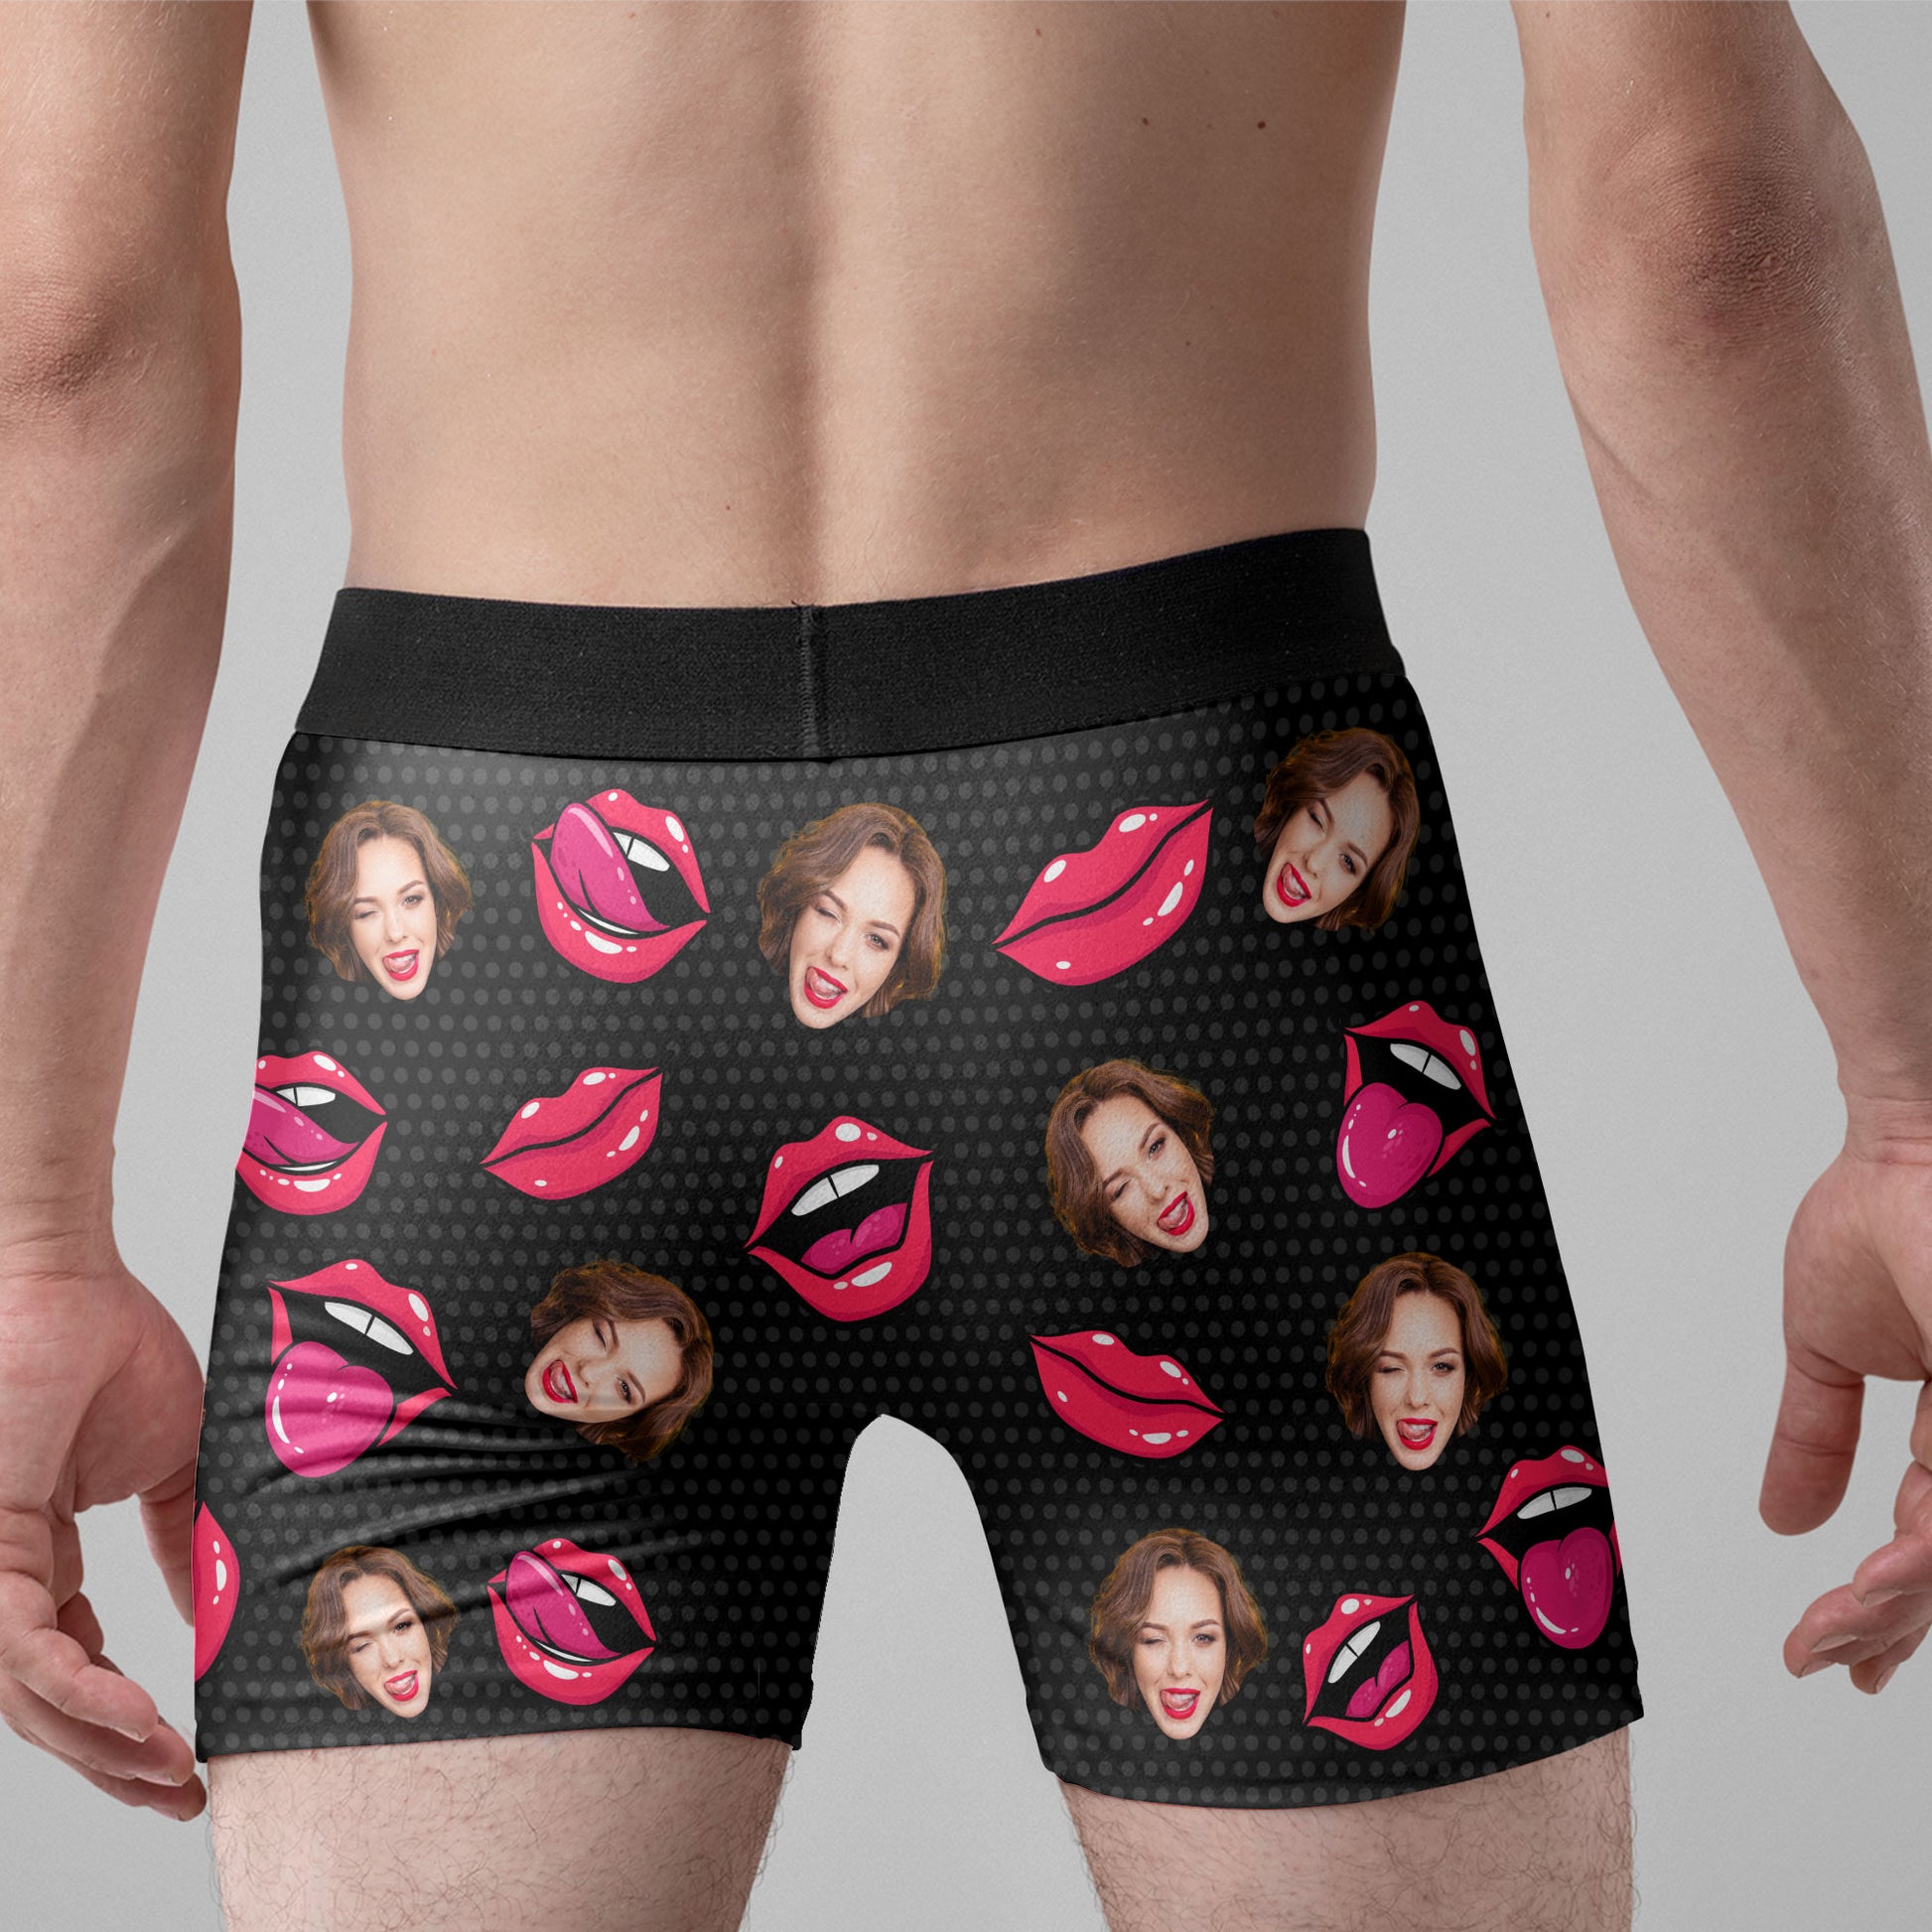 Custom Girlfriend Face Boxers Custom Waistband Text Boxer Funny Naughty  Underwear - Personalized Face Photo On Men's Underwear